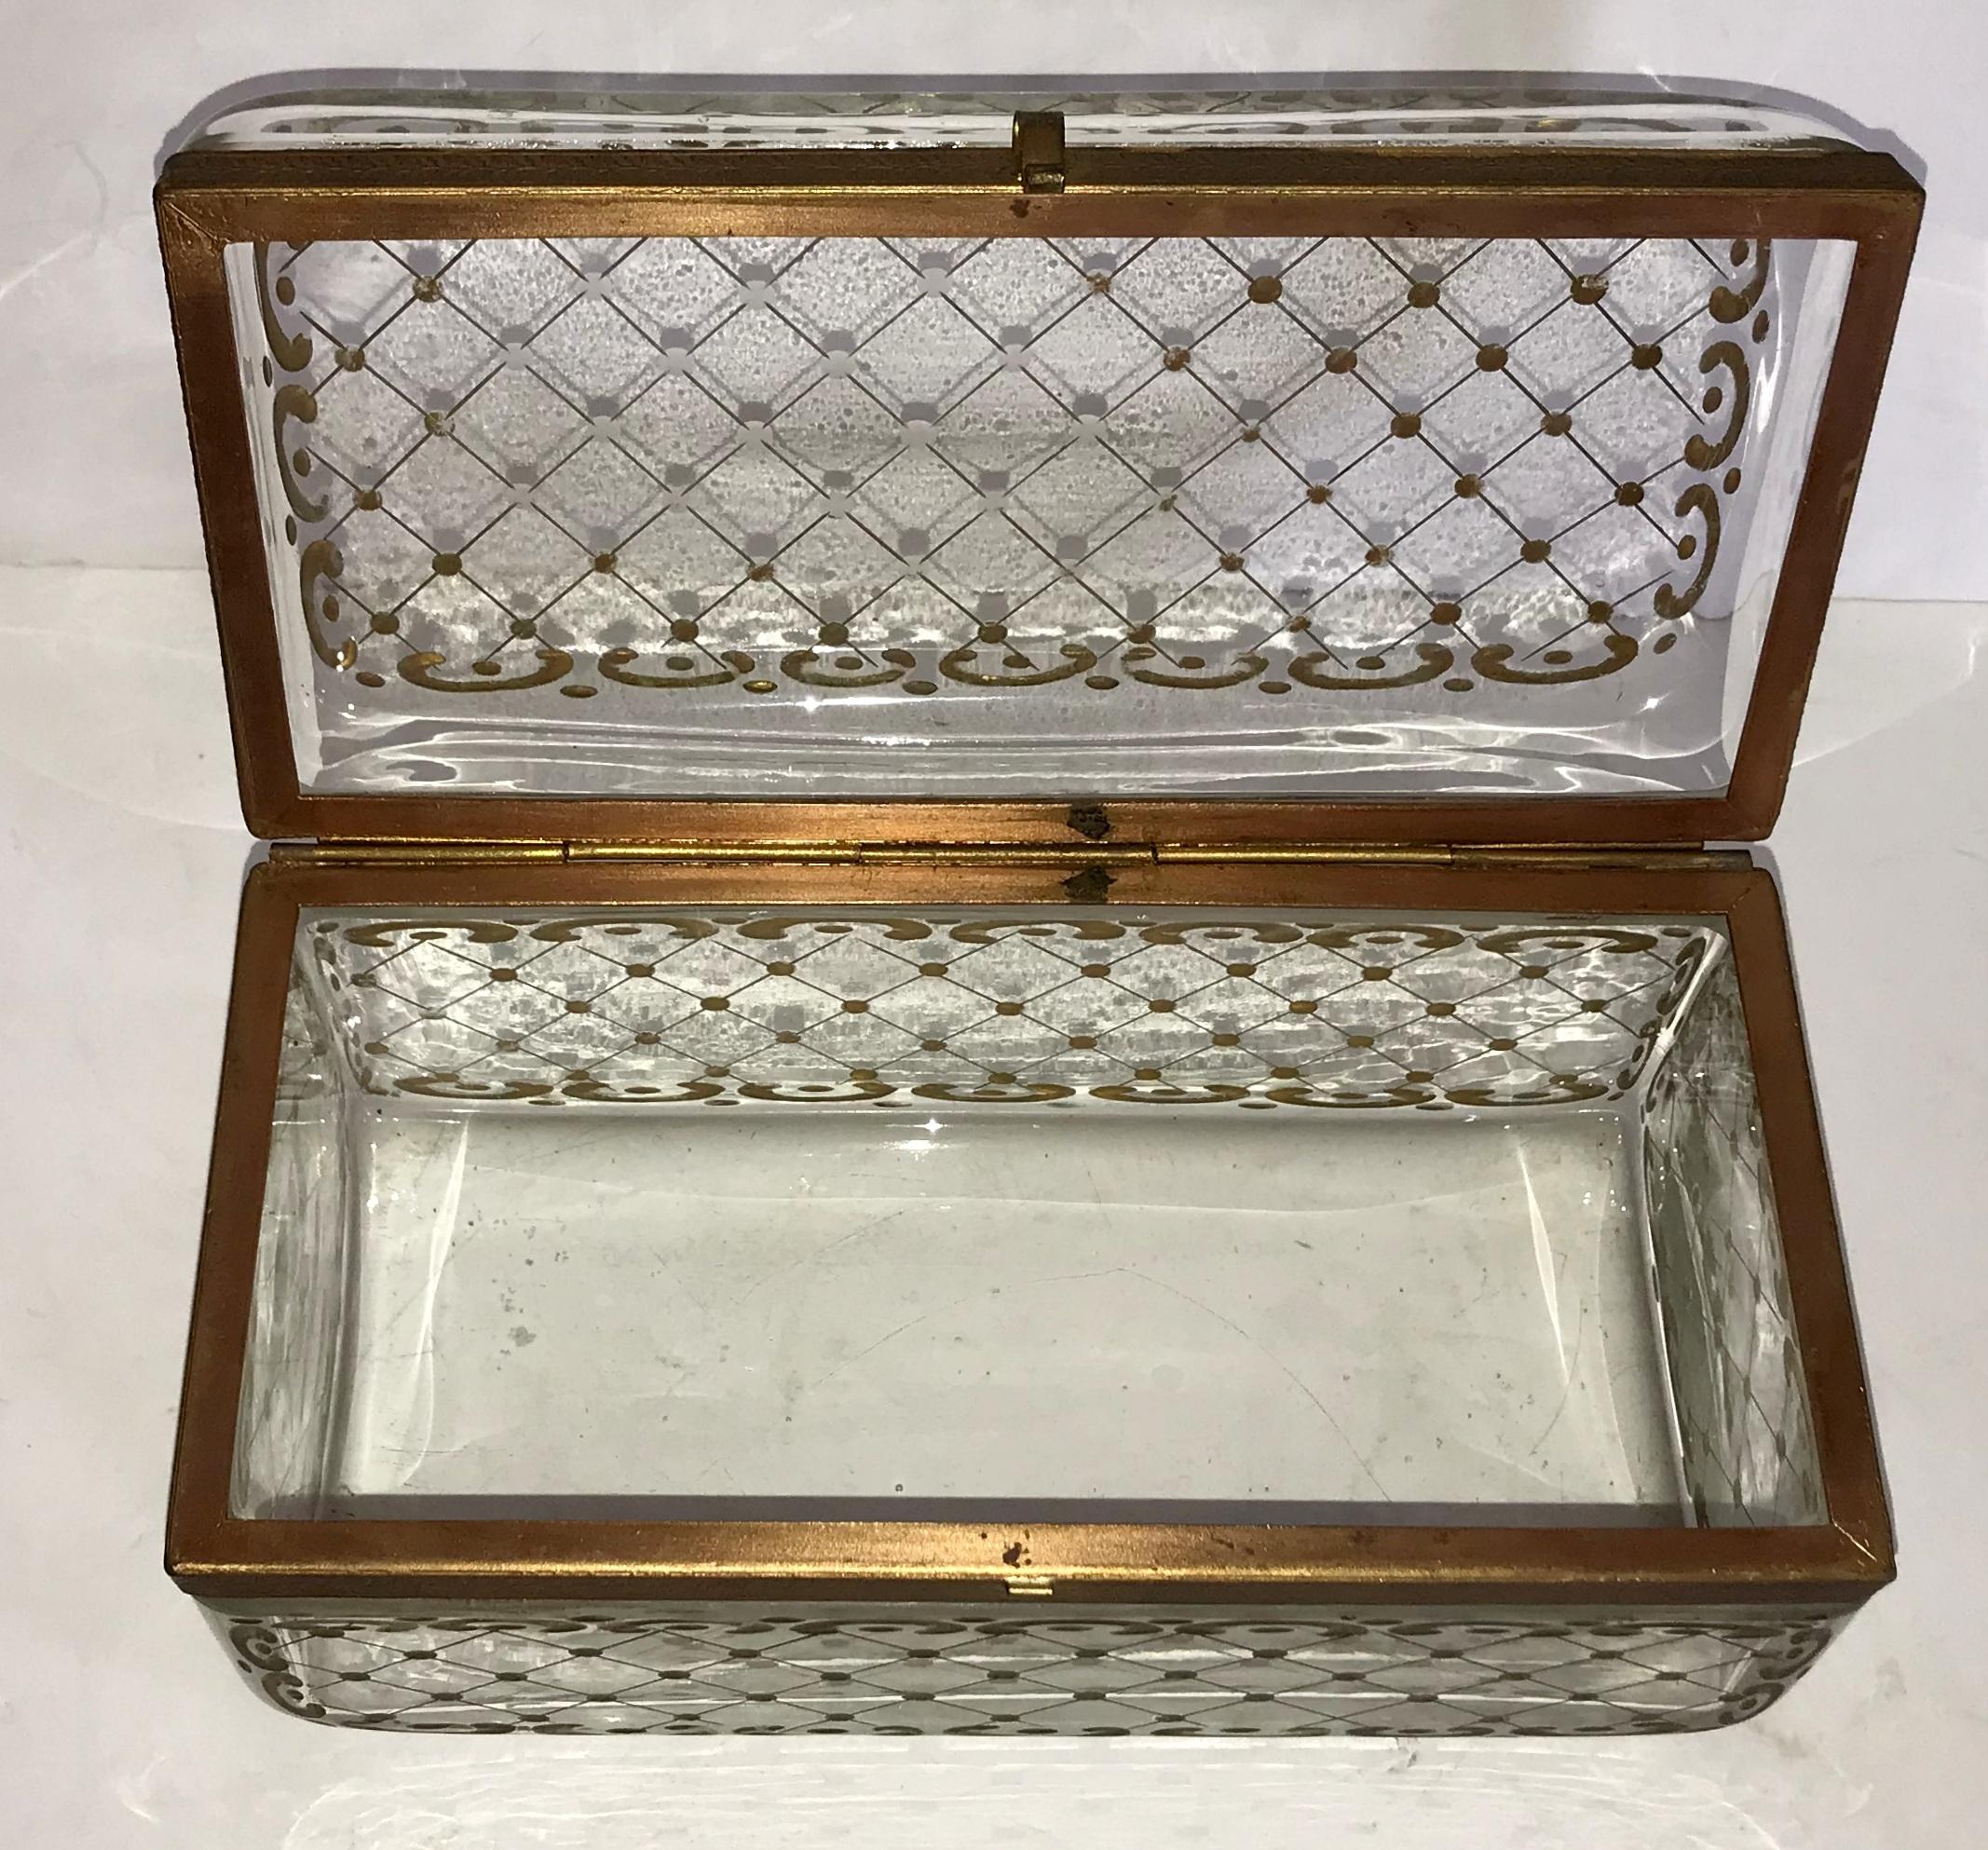 Rare Large Antique Hand Painted Crystal Bronze Baccarat Jewelry Glove Box Casket 1